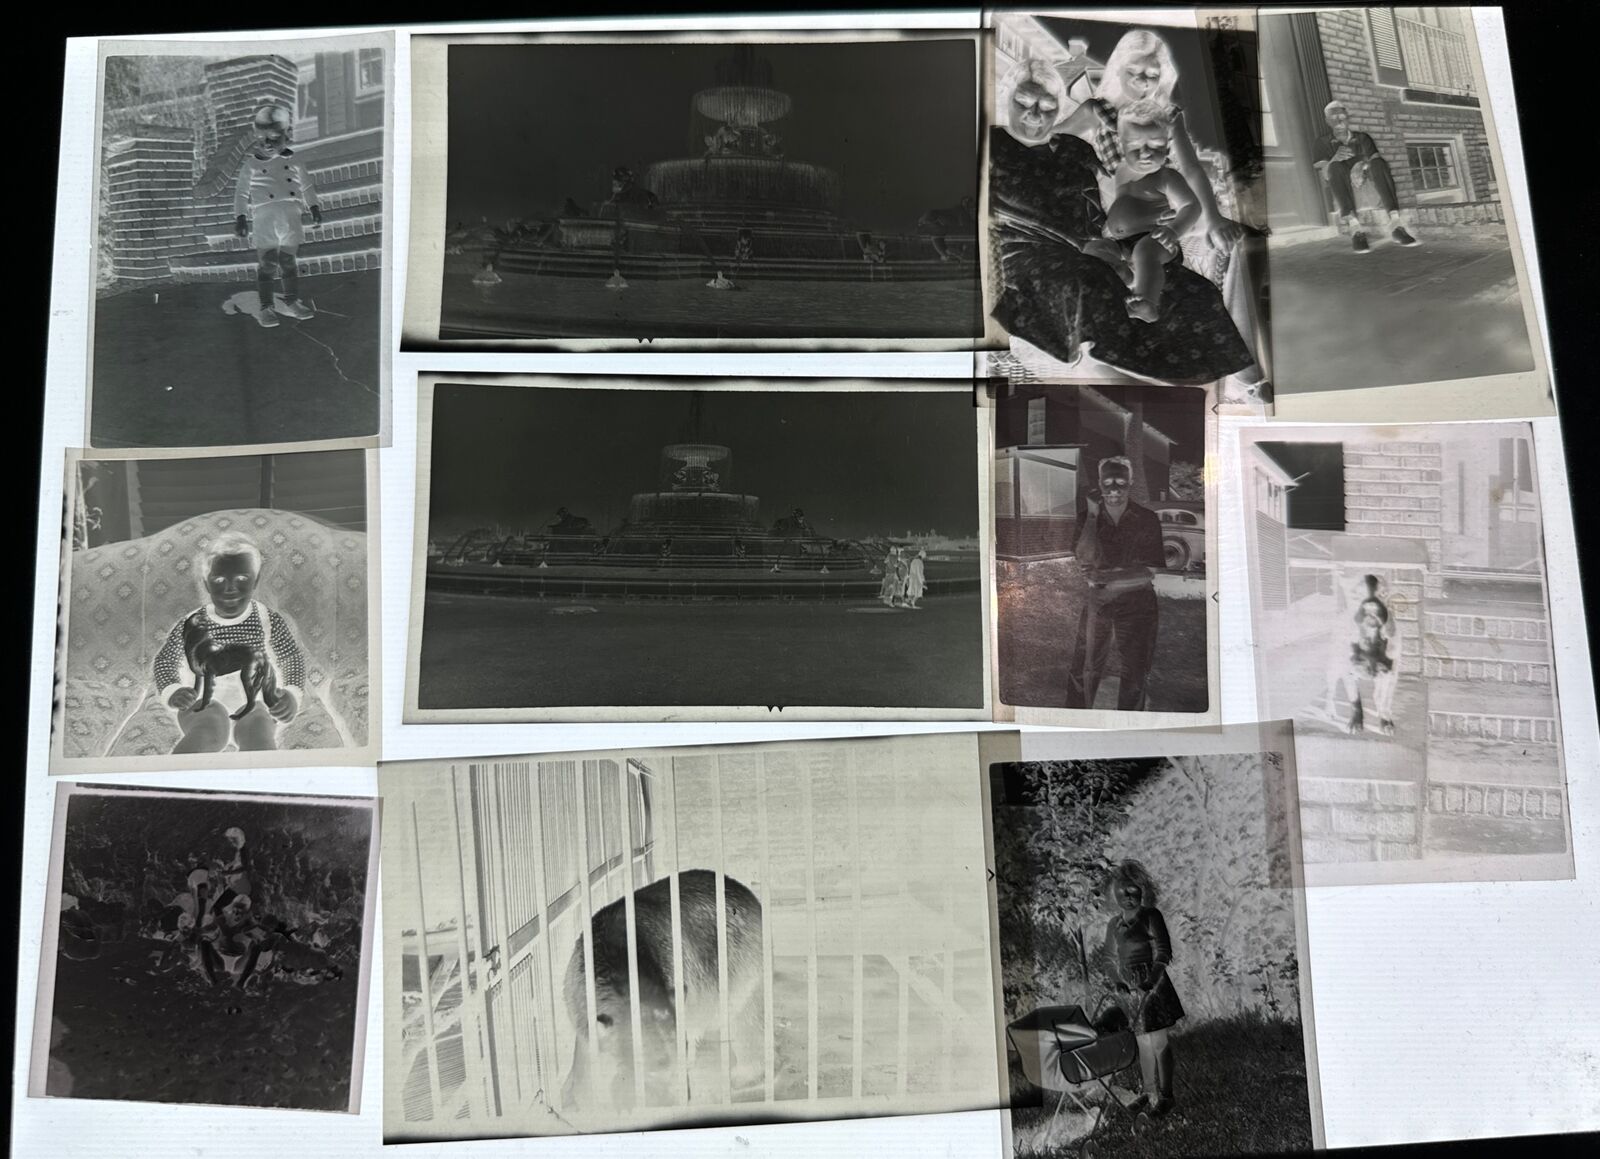 Lot of 100 Vintage Film Photo Negatives 1940s To 1960s People Car Building Farm